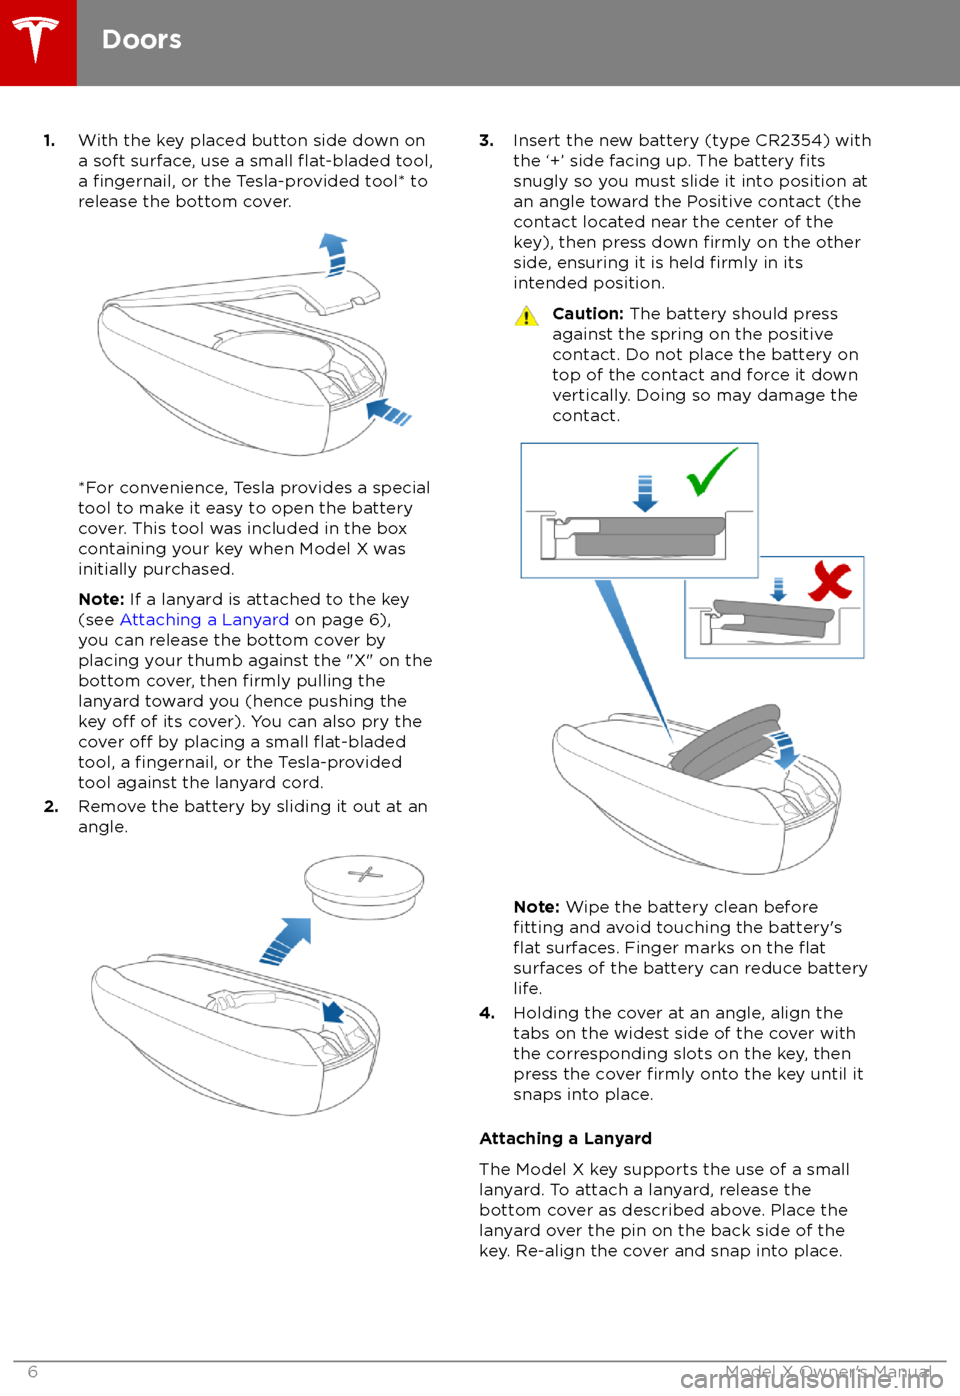 TESLA MODEL X 2018  Owners Manual  1.With the key placed button side down on
a soft surface, use a small flat-bladed tool,
a fingernail, or the Tesla-provided tool* to
release the bottom cover.
*For convenience, Tesla provides a specia